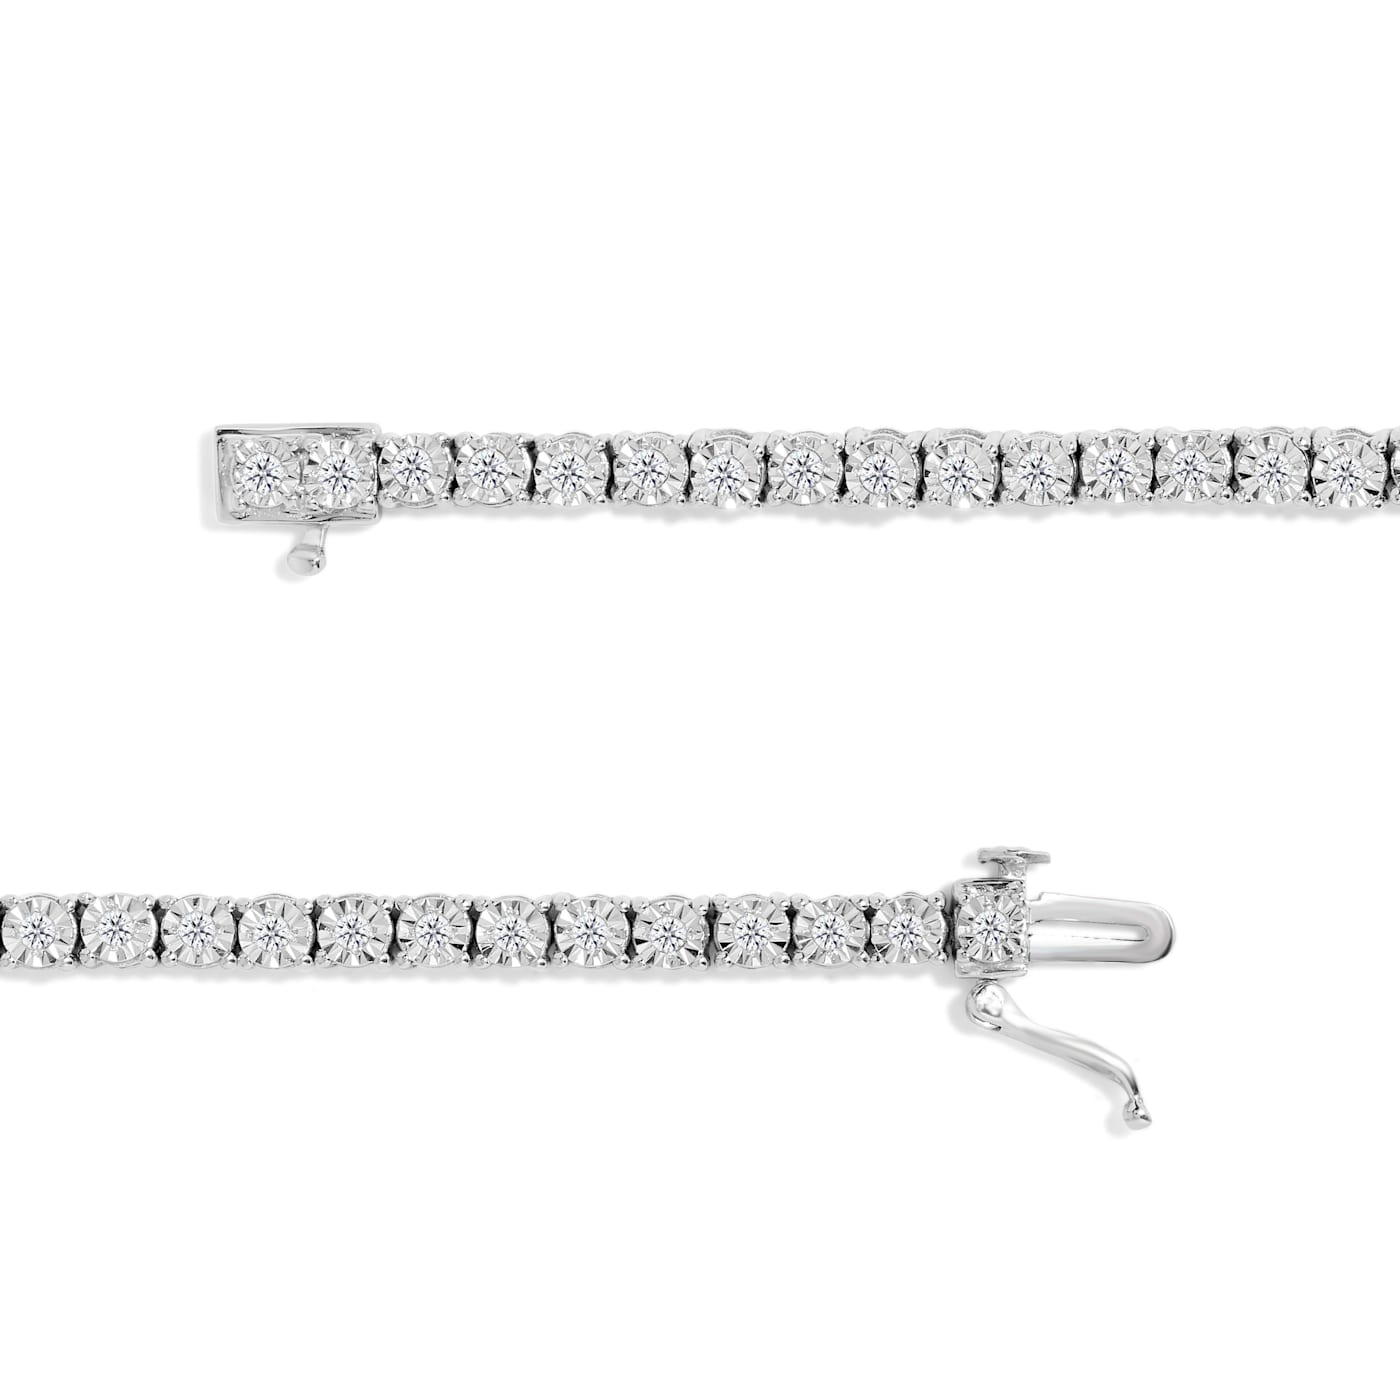 What is a Jewelry Safety Clasp?